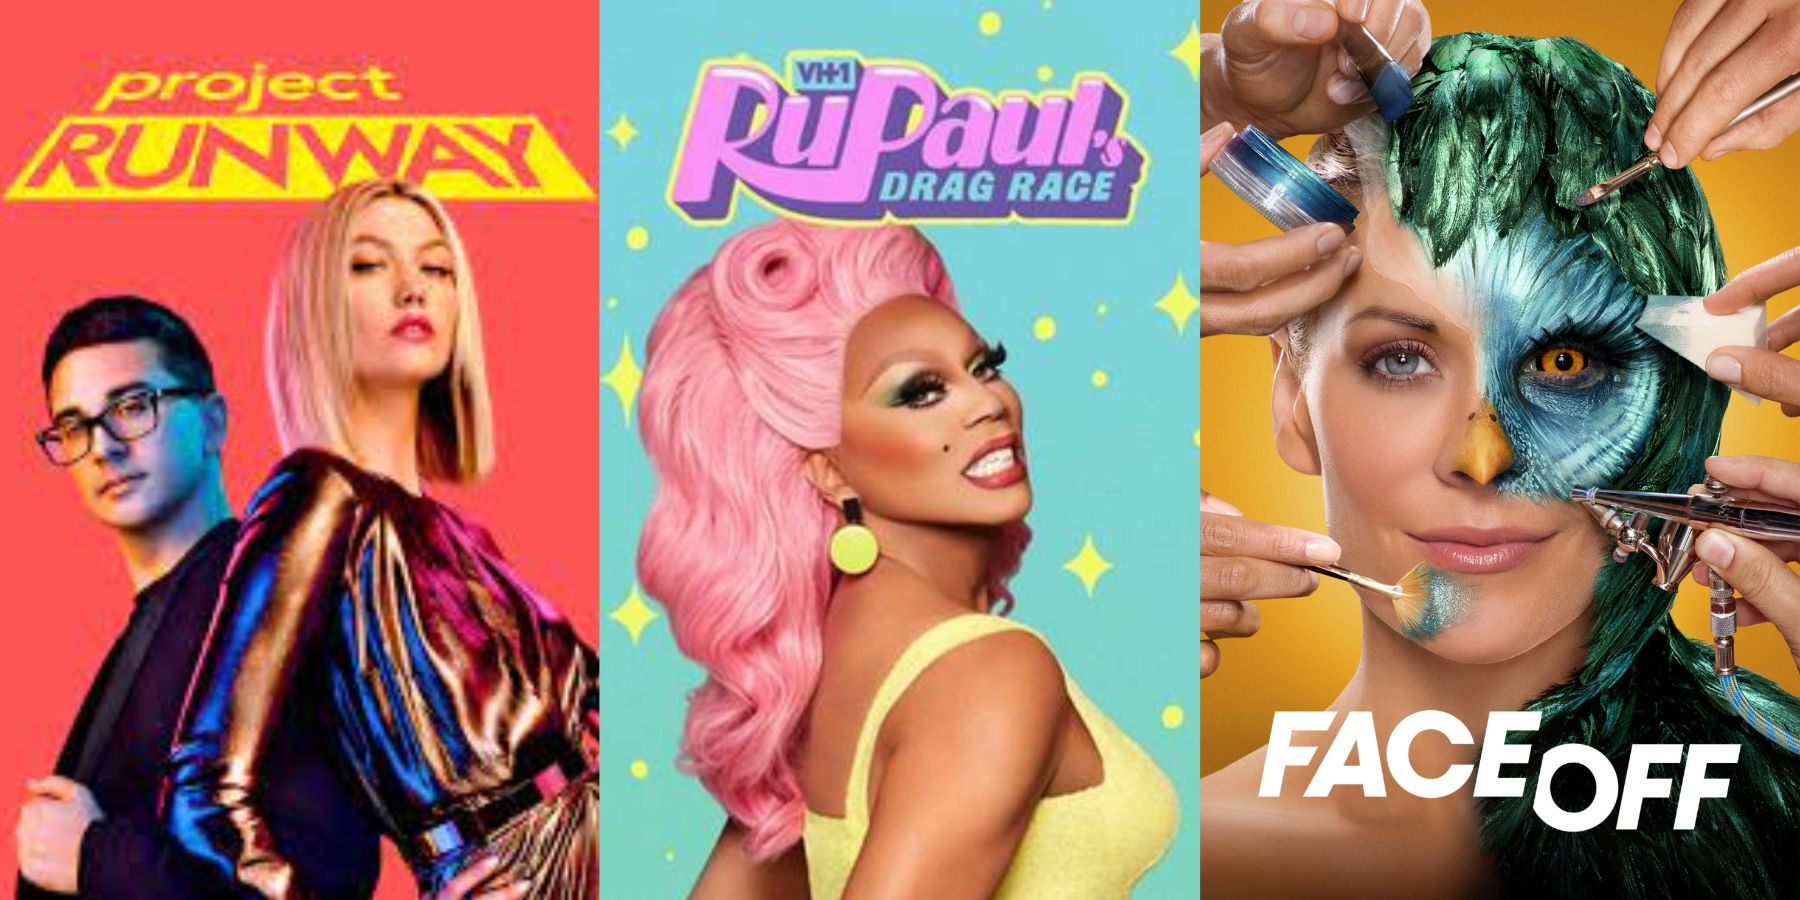 Posters for Project Runway, Drag Race, and Face Off.